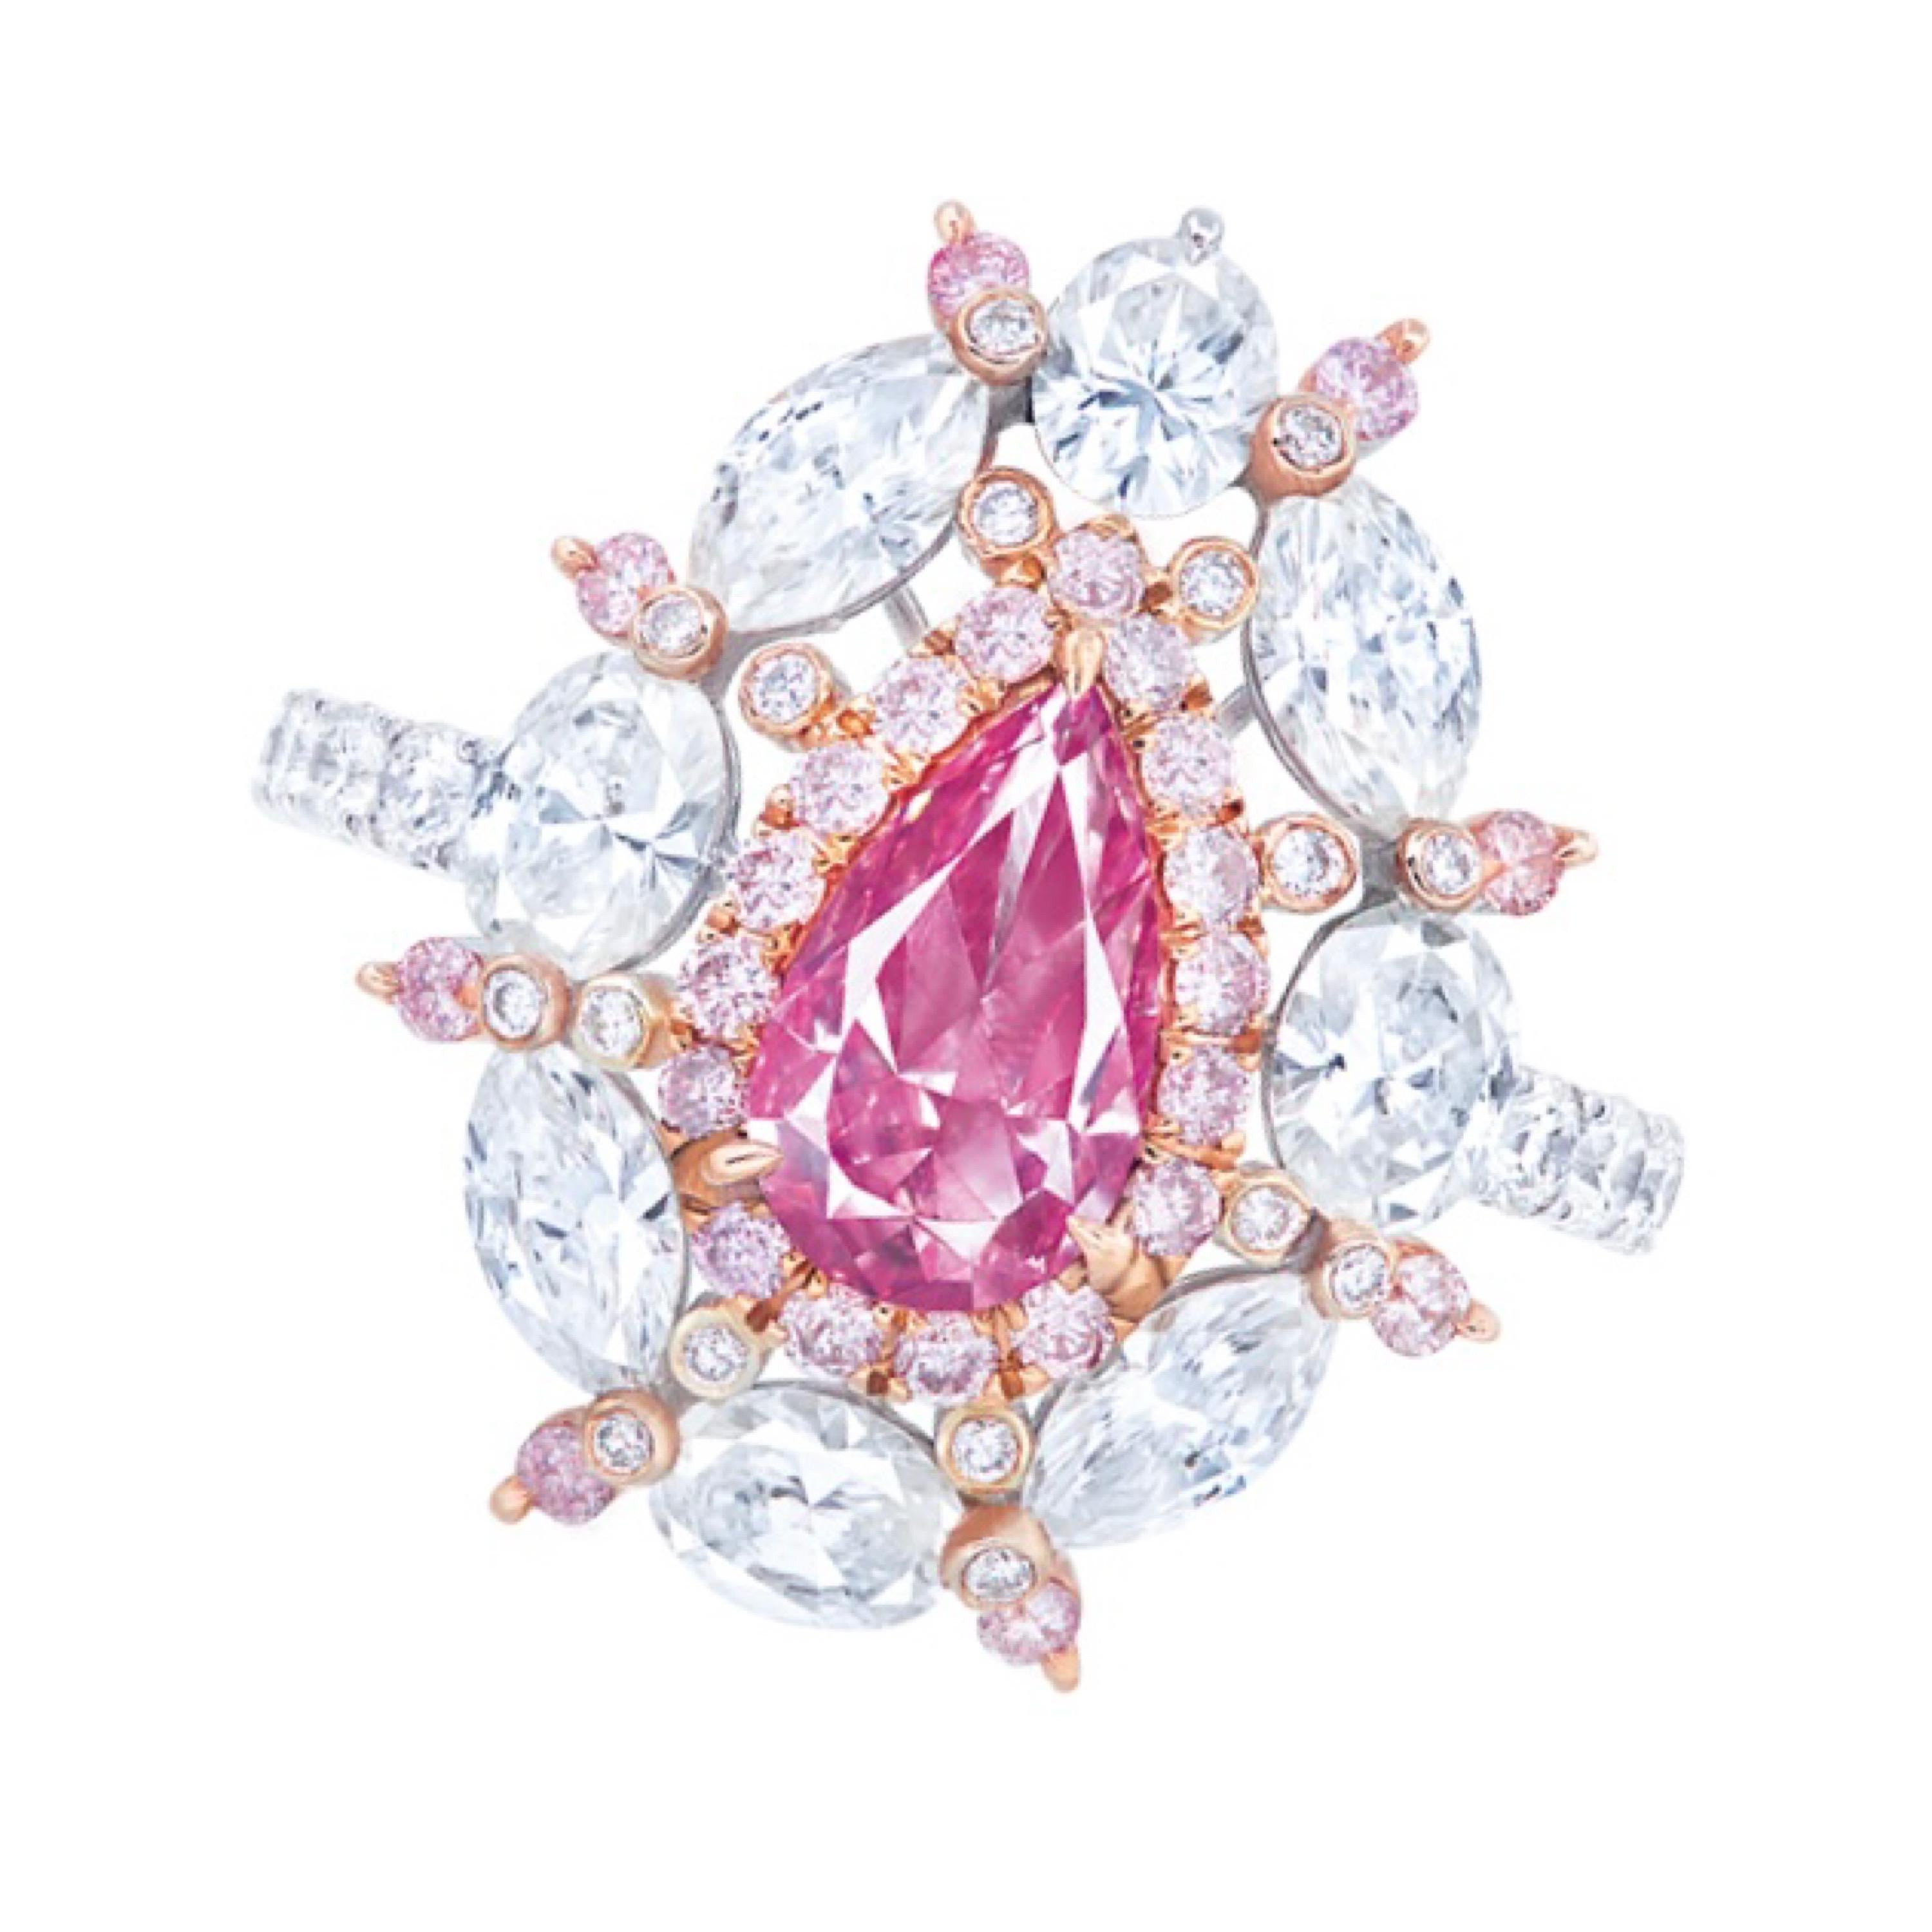 Main stone: 1.00 carats
Color: Fancy Vivid Purplish Pink
Shape: PEAR
Setting: 42 white diamonds with a total of about 0.262 carats, 12 white diamonds with a total of about 0.419 carats, 4 fancy turner marquise diamonds with a total of about 0.798